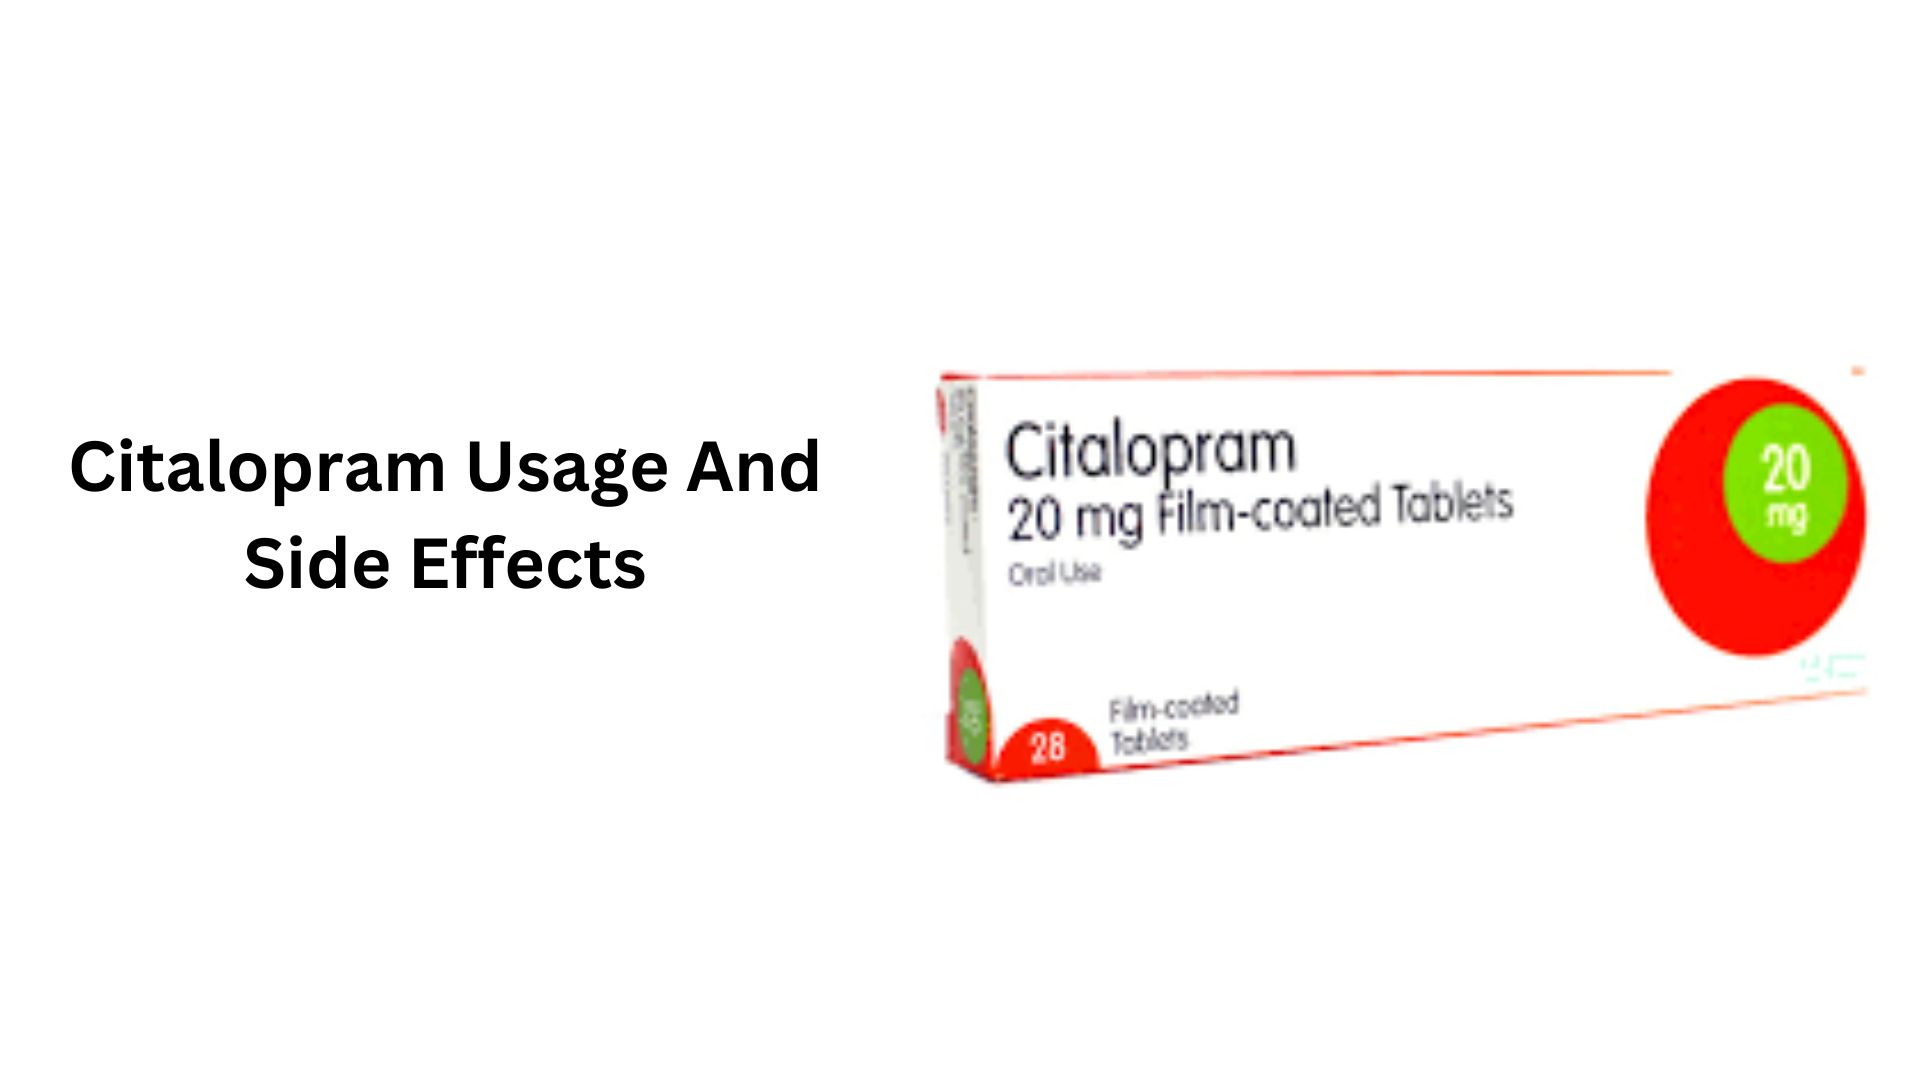 Citalopram Usage And Side Effects